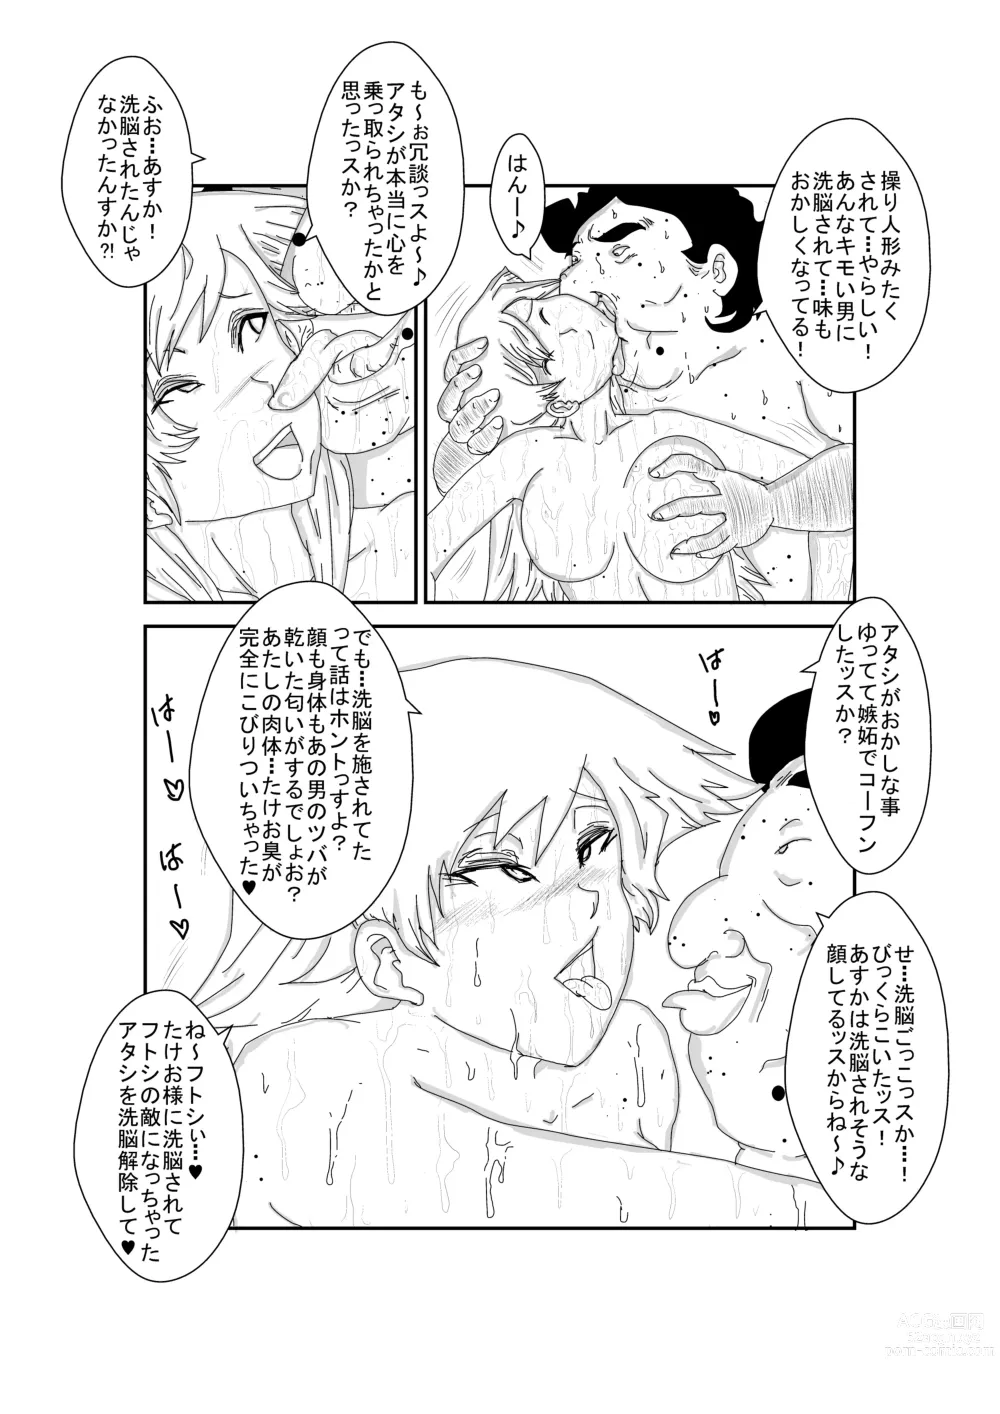 Page 45 of doujinshi Alexis Rodes Corrupted